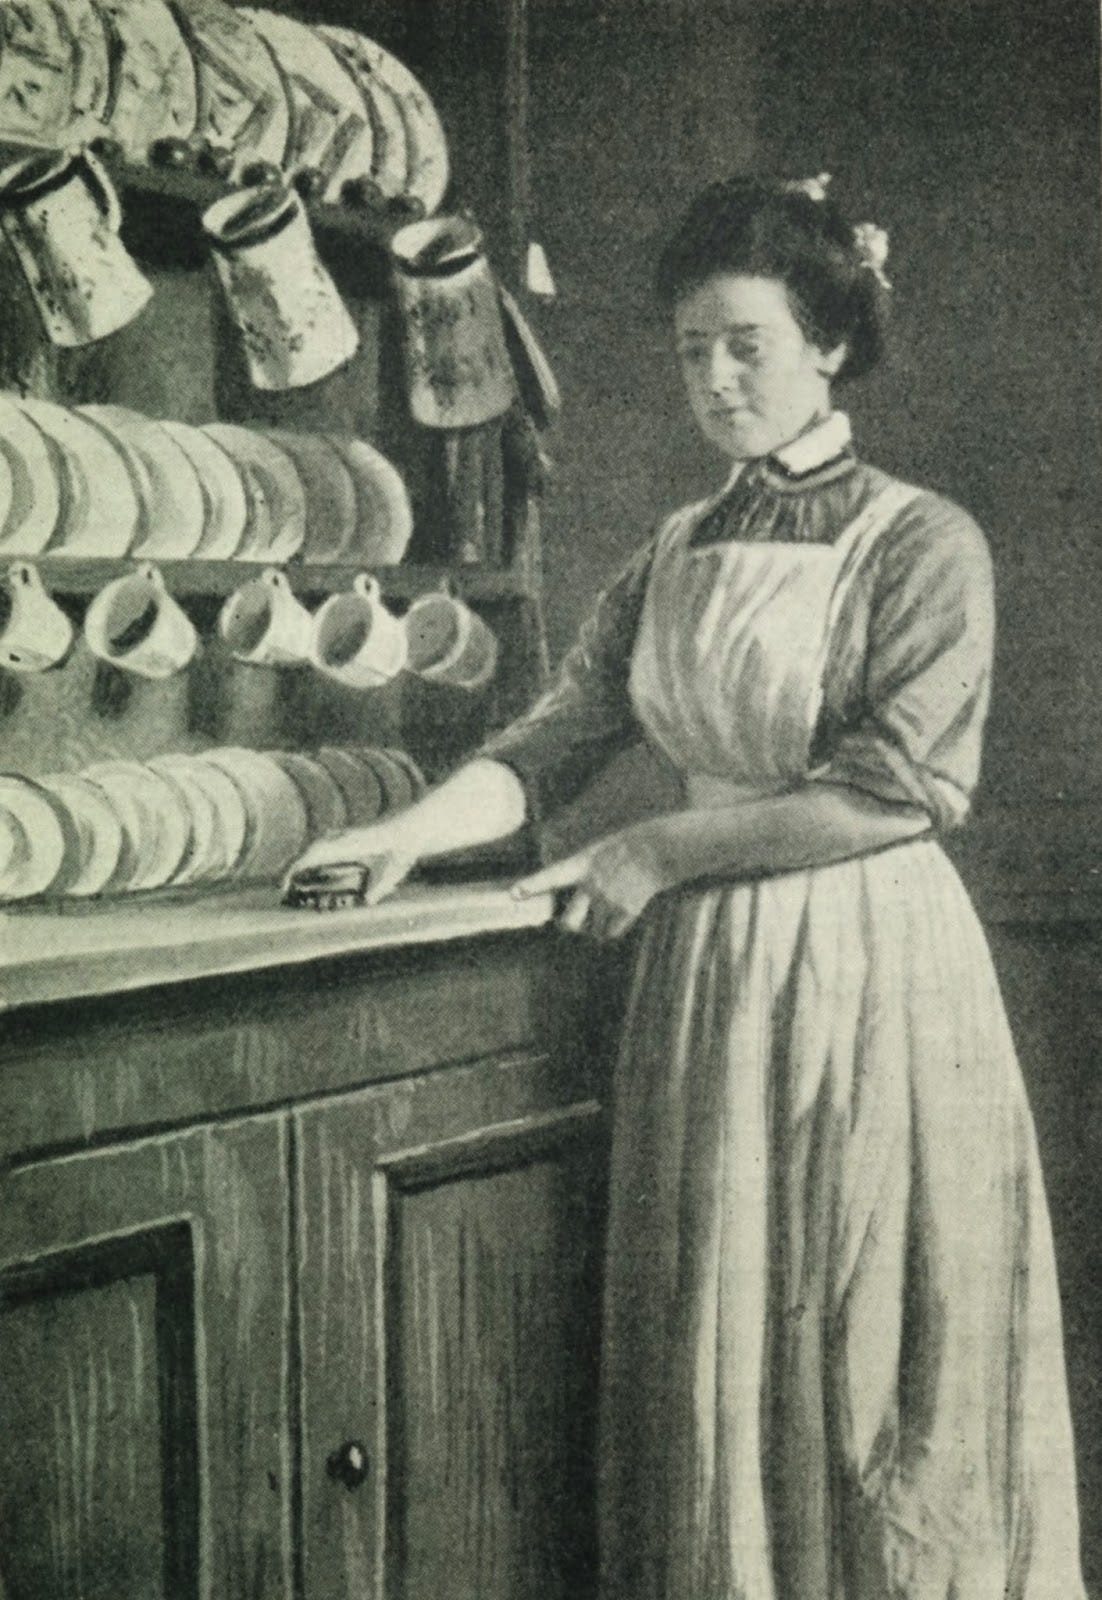 VICTORIAN SERVANTS SPEAK OUT | A Visitor's Guide to Victorian England